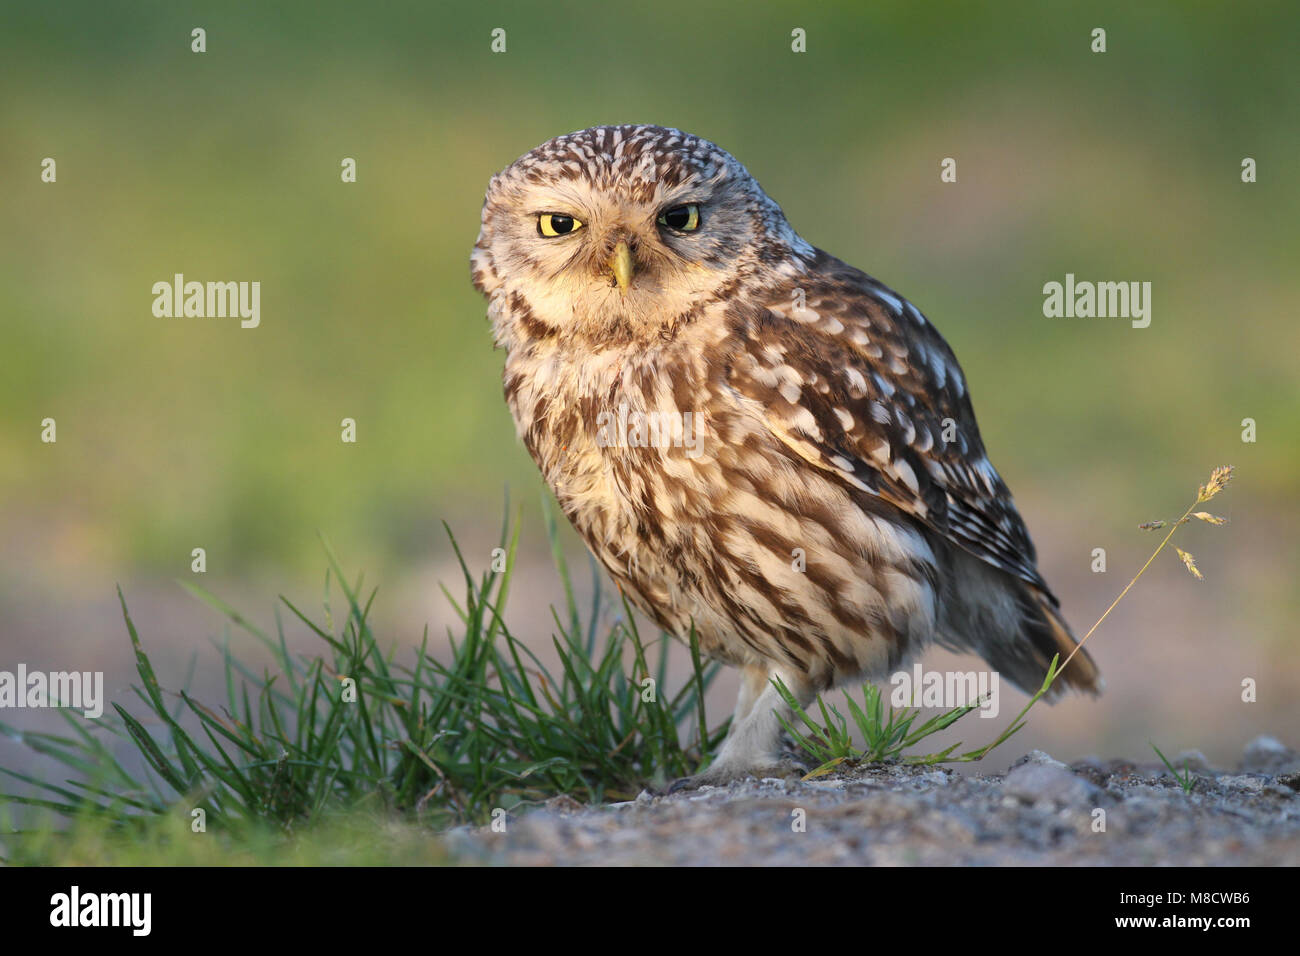 Steenuil zittend; Little Owl perched Stock Photo